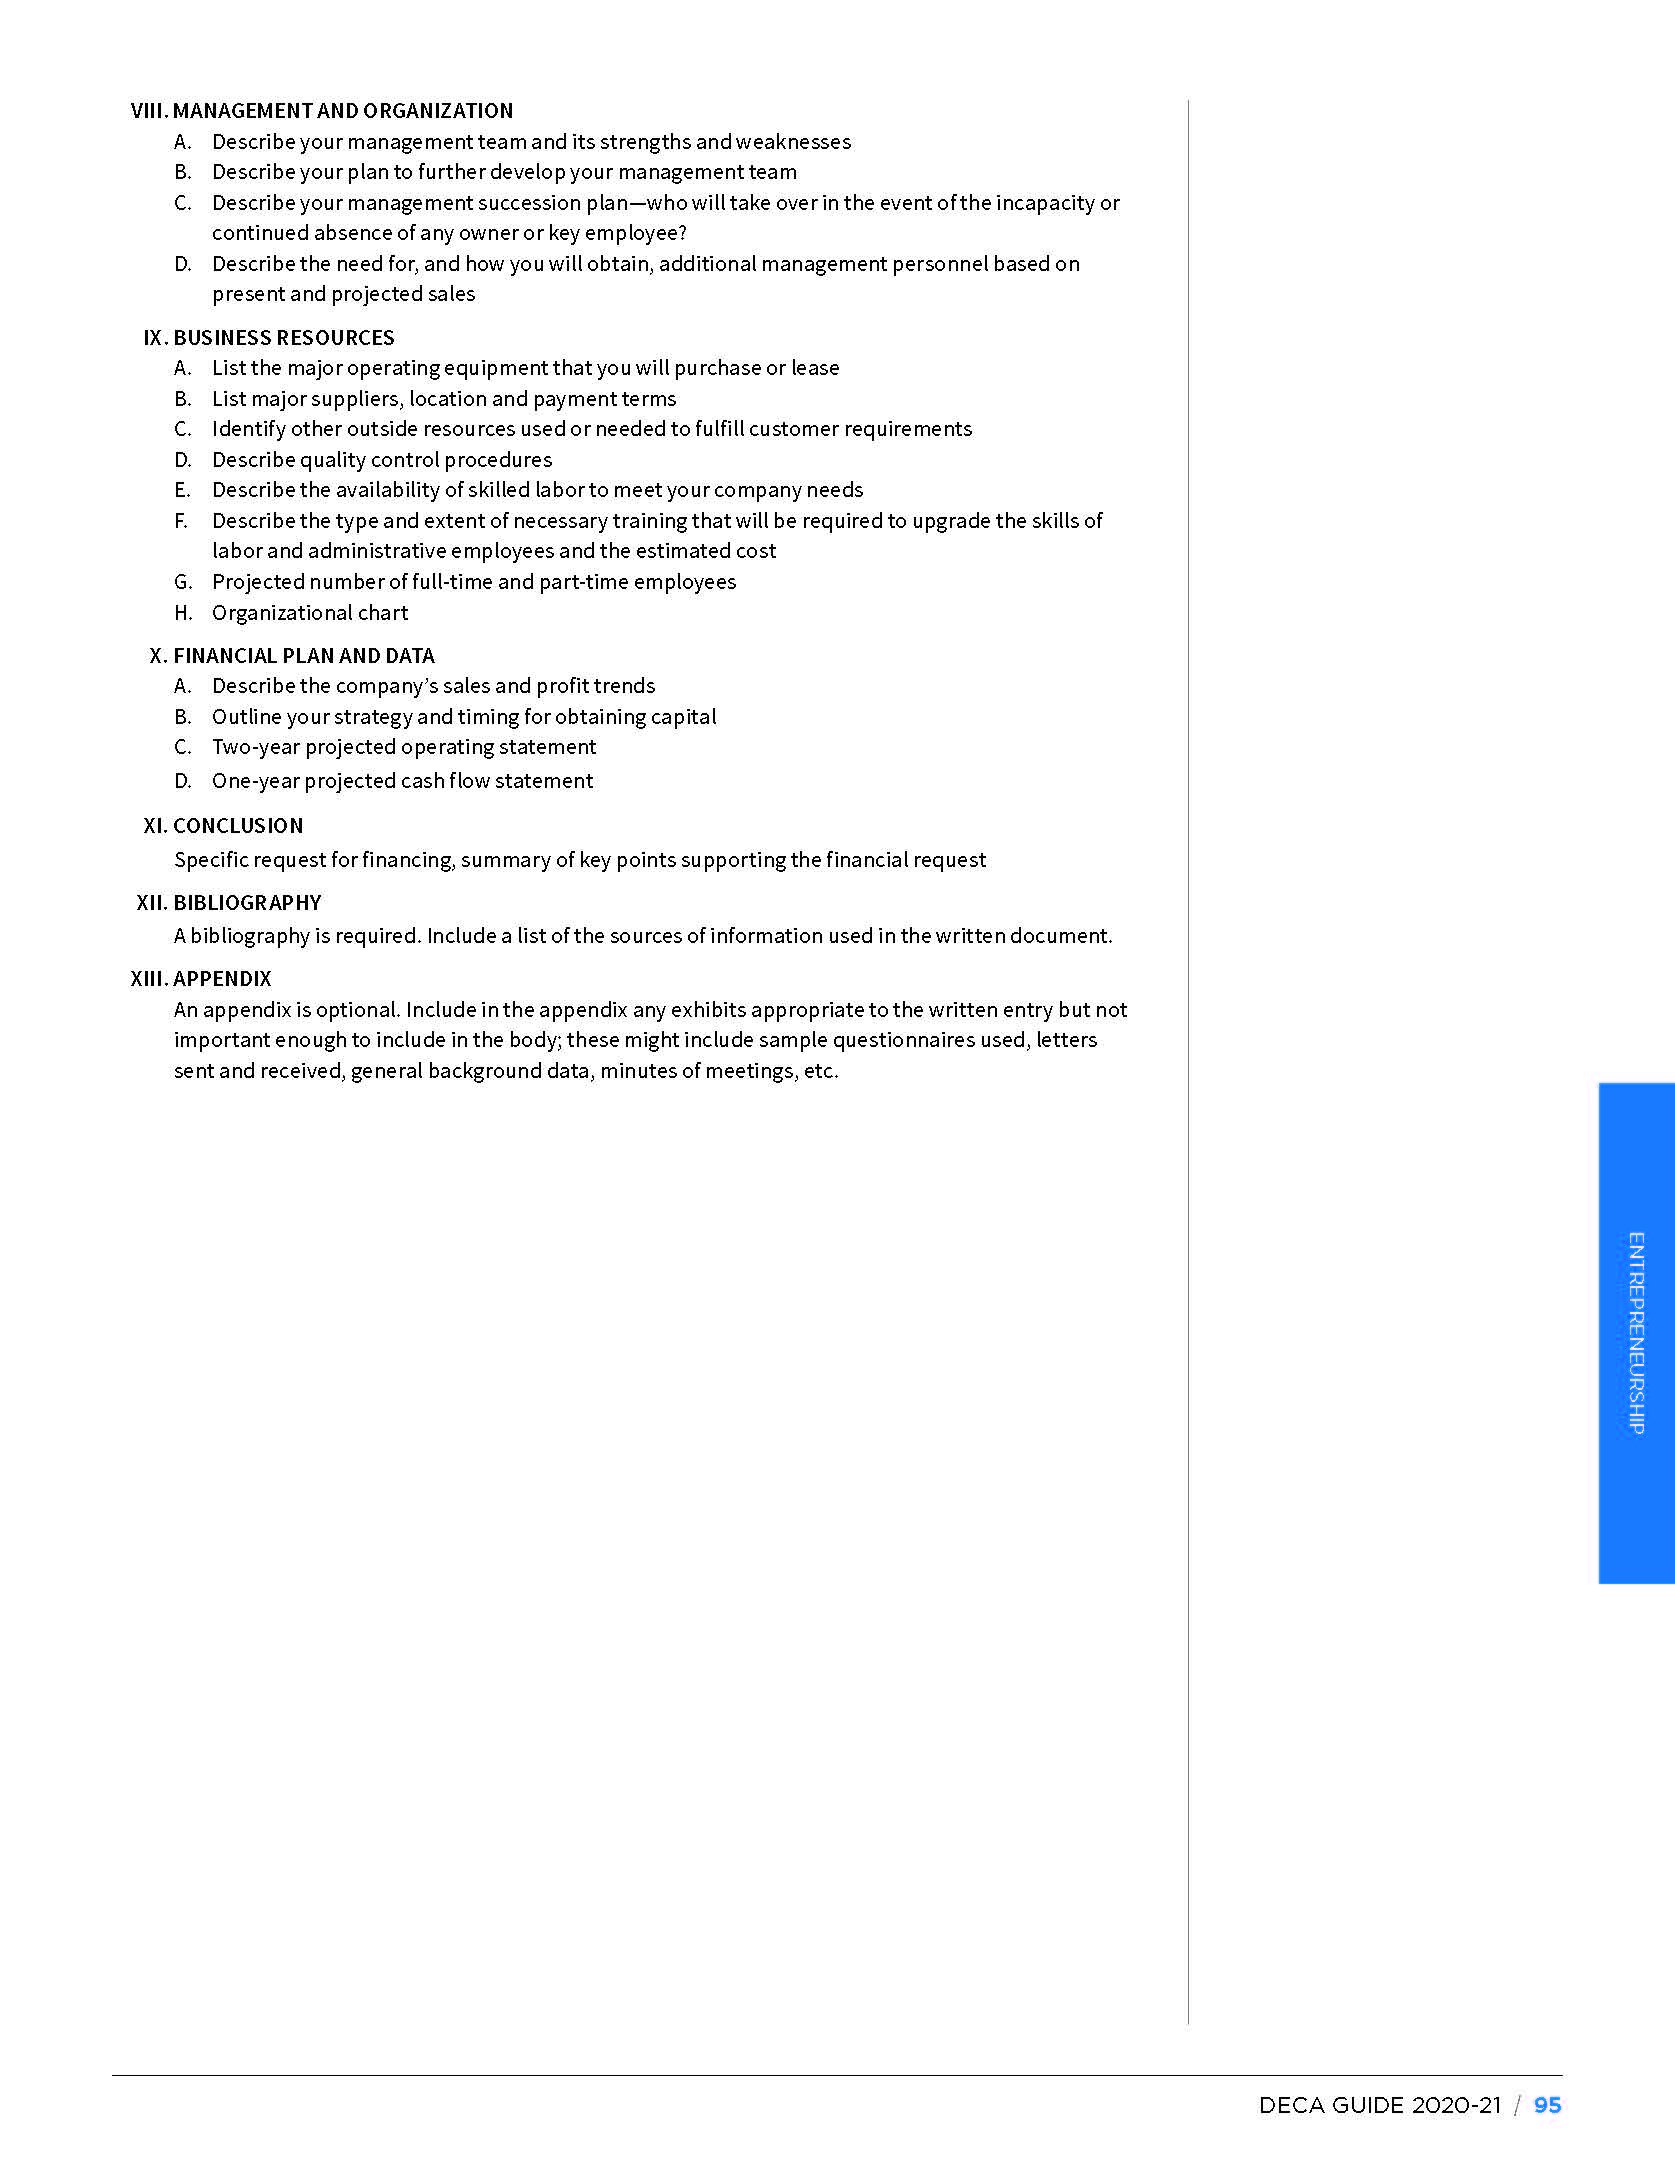 DECA-2020-HS-Guide_Page_097.jpg